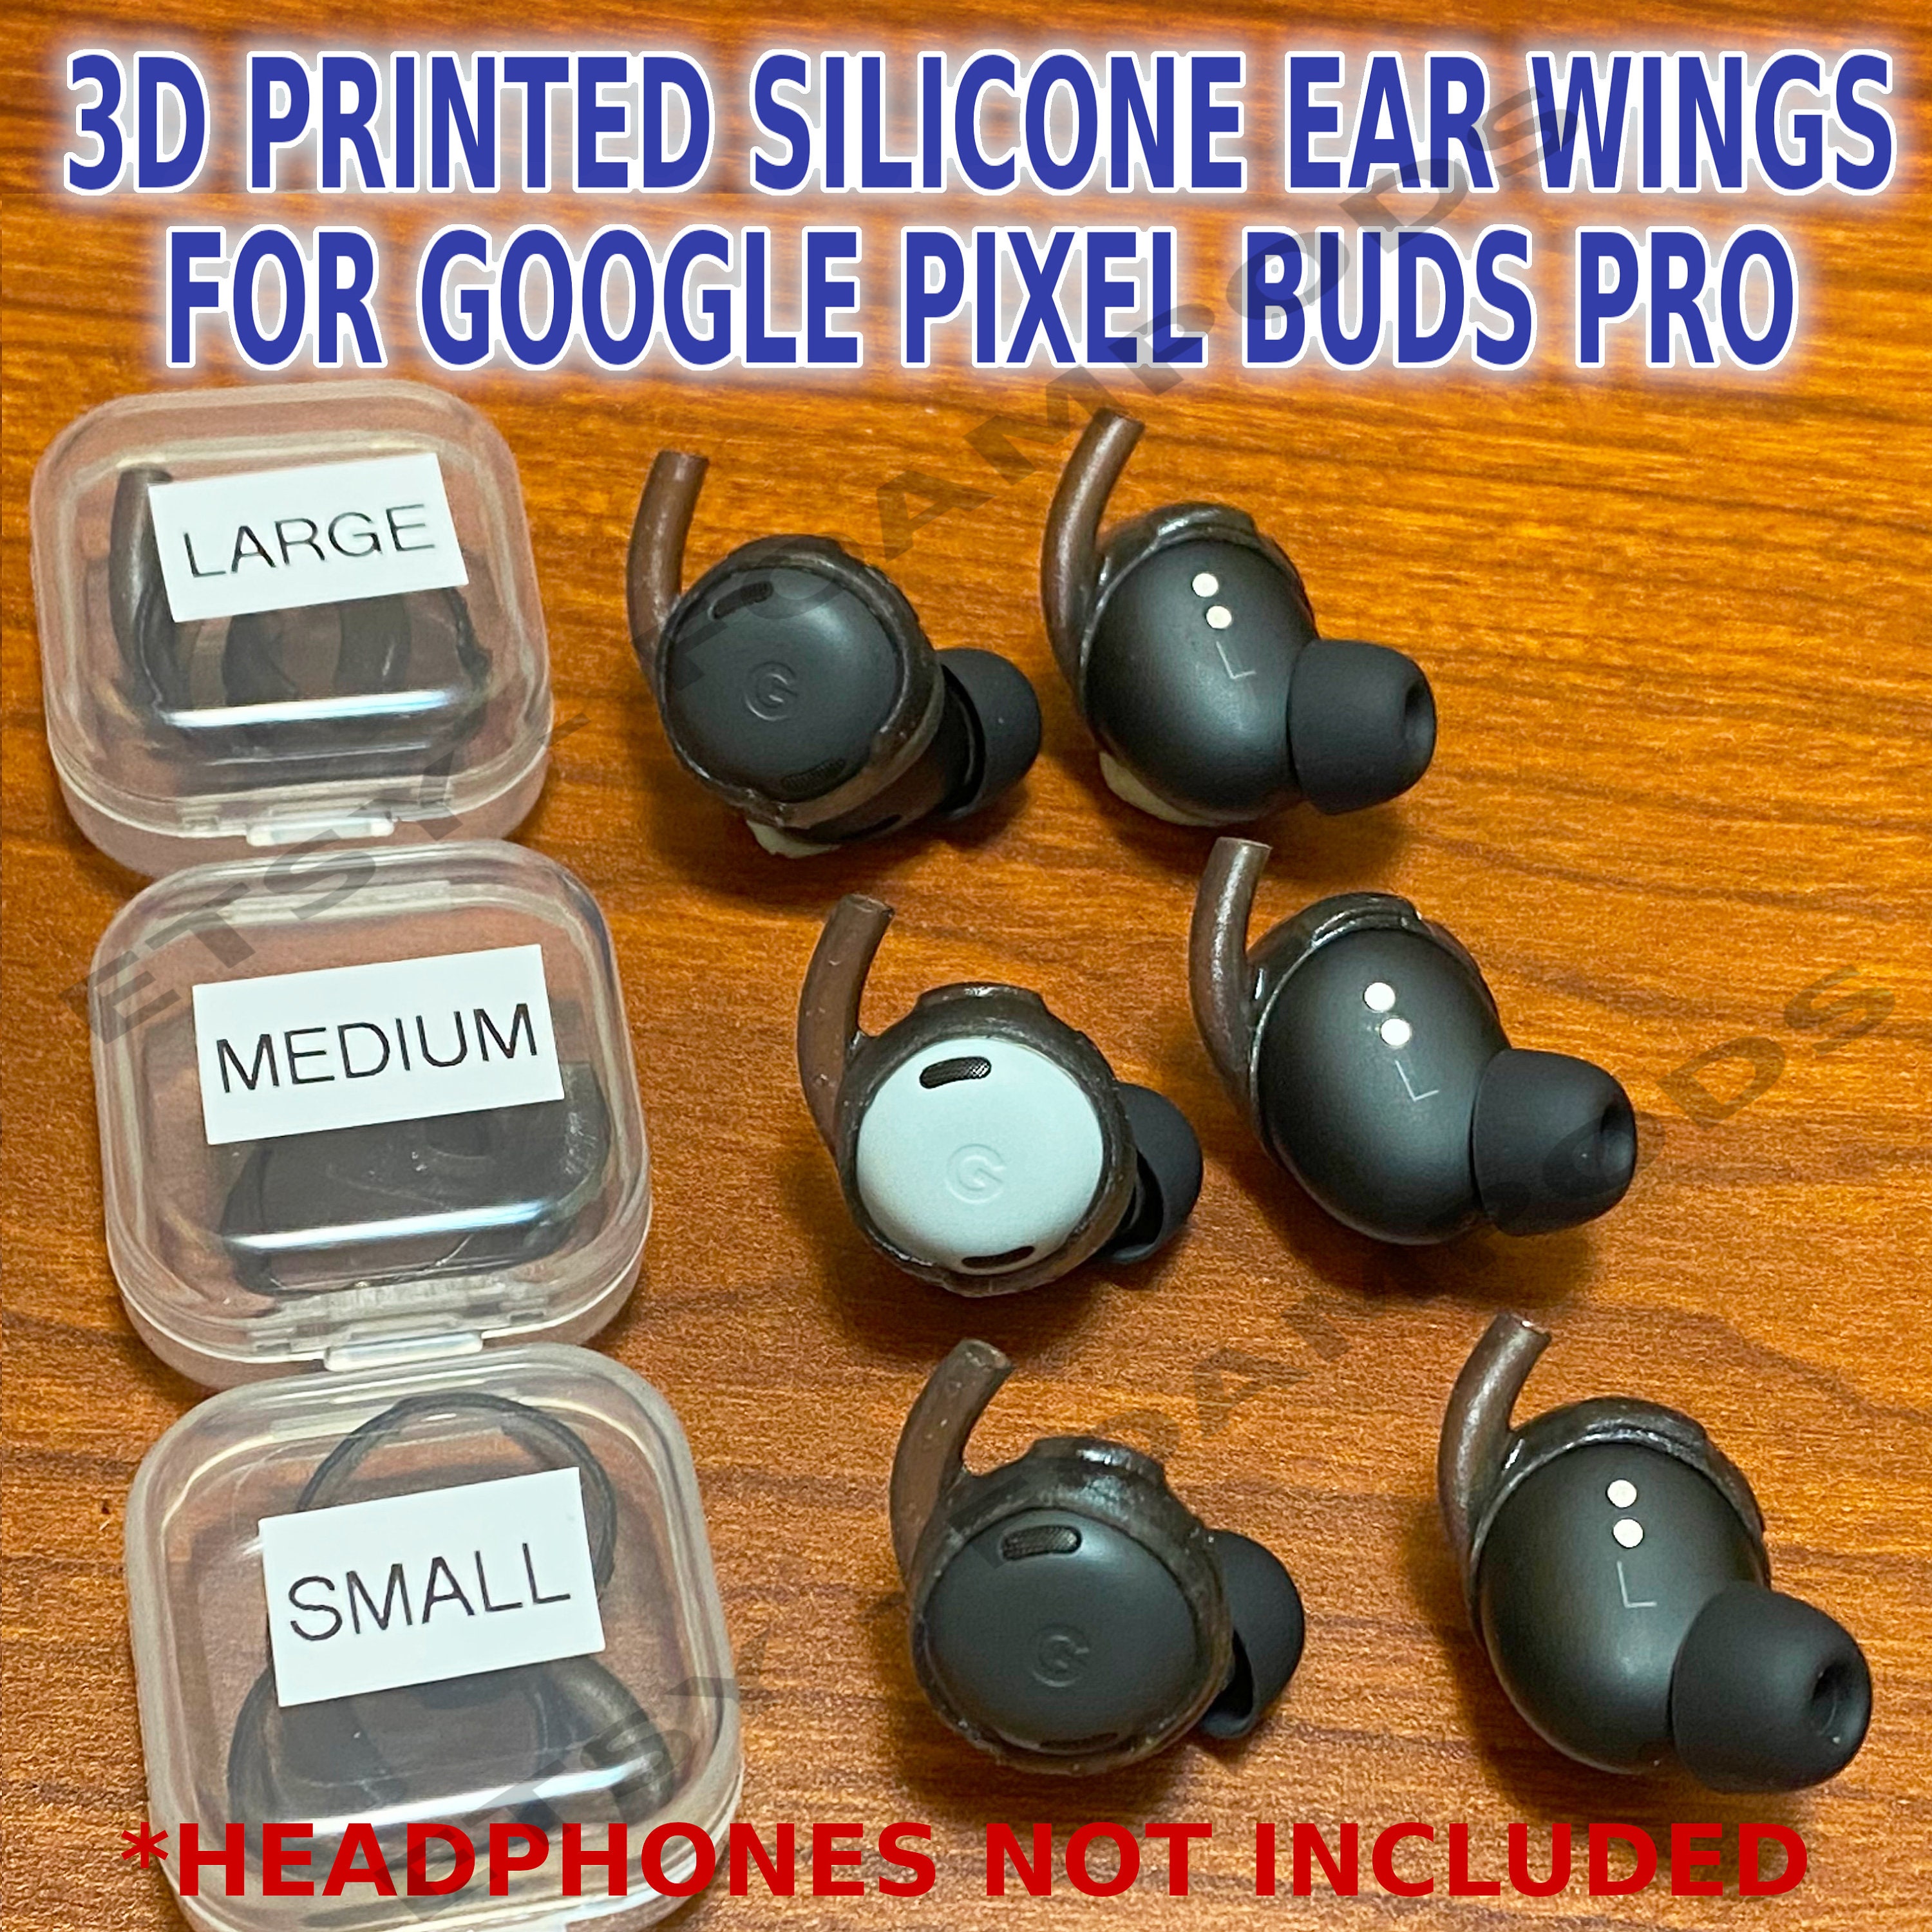 Google Pixel Buds Pro Active Noise Cancelling True Wireless